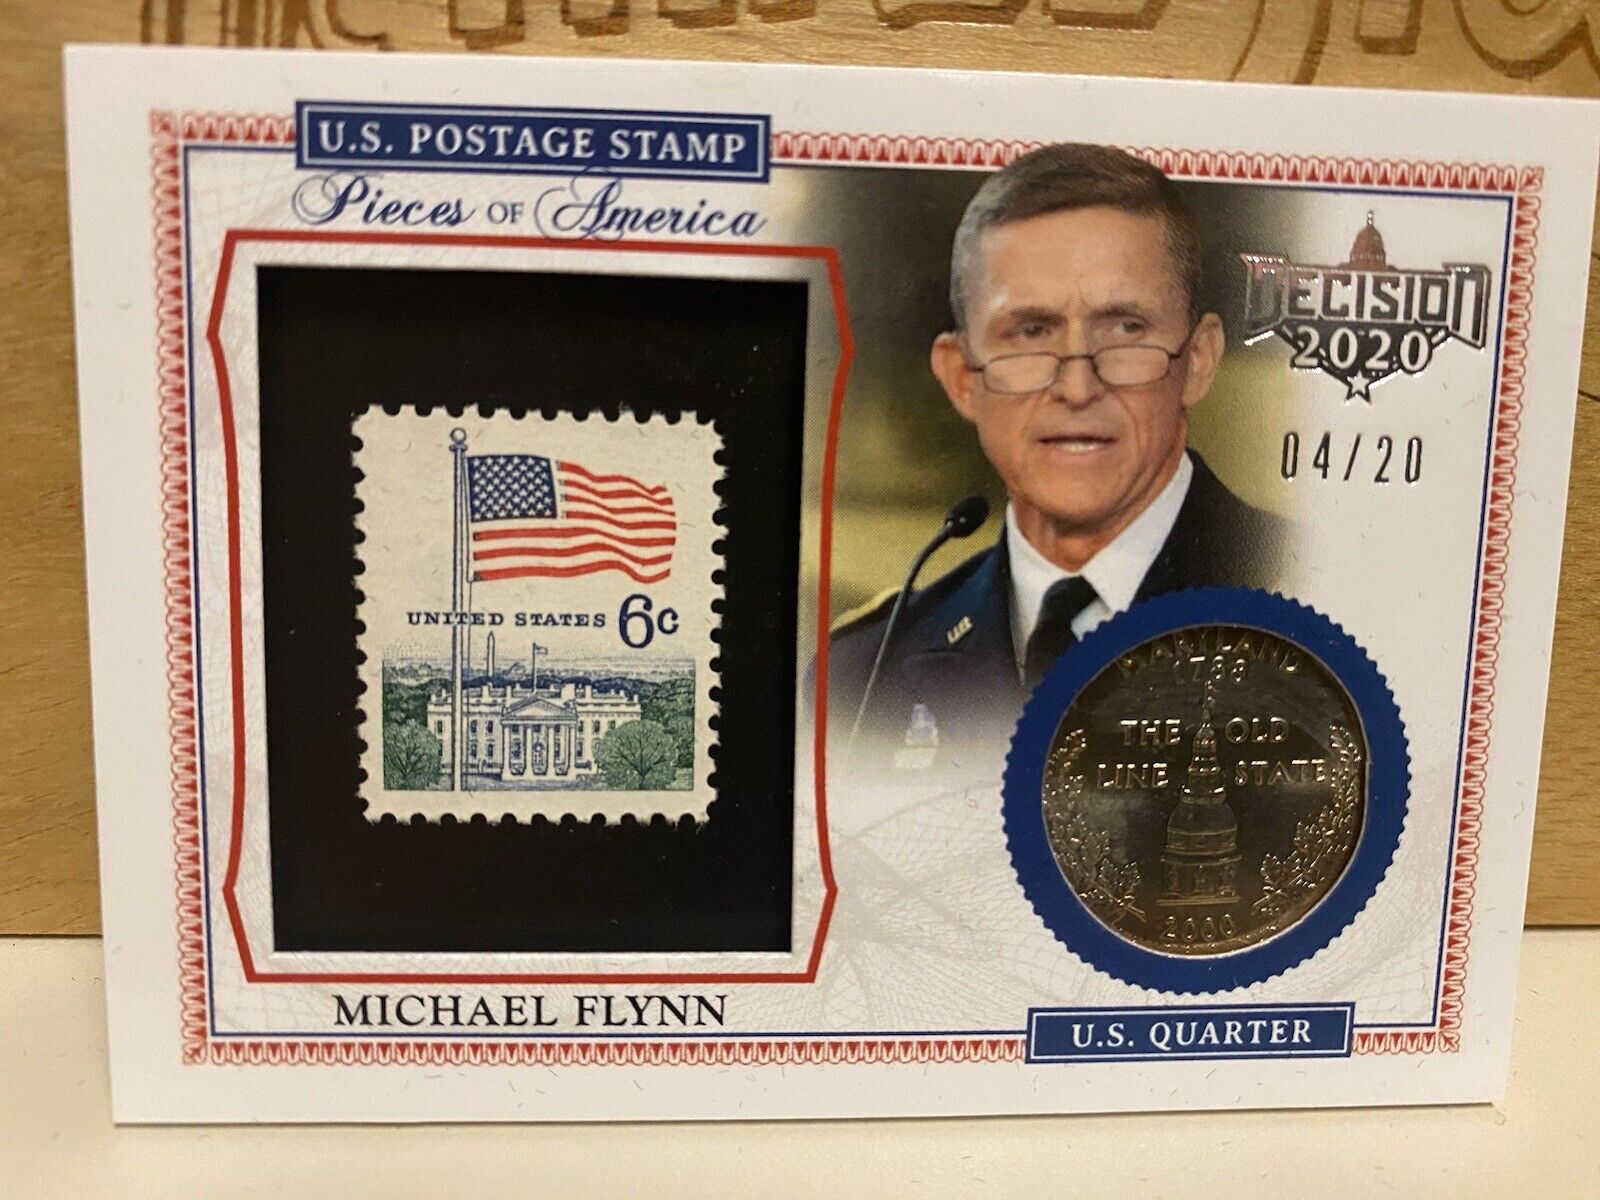 MICHAEL FLYNN 2020 DECISION POSTAGE STAMP & COIN 1/20 CARD - POA-47